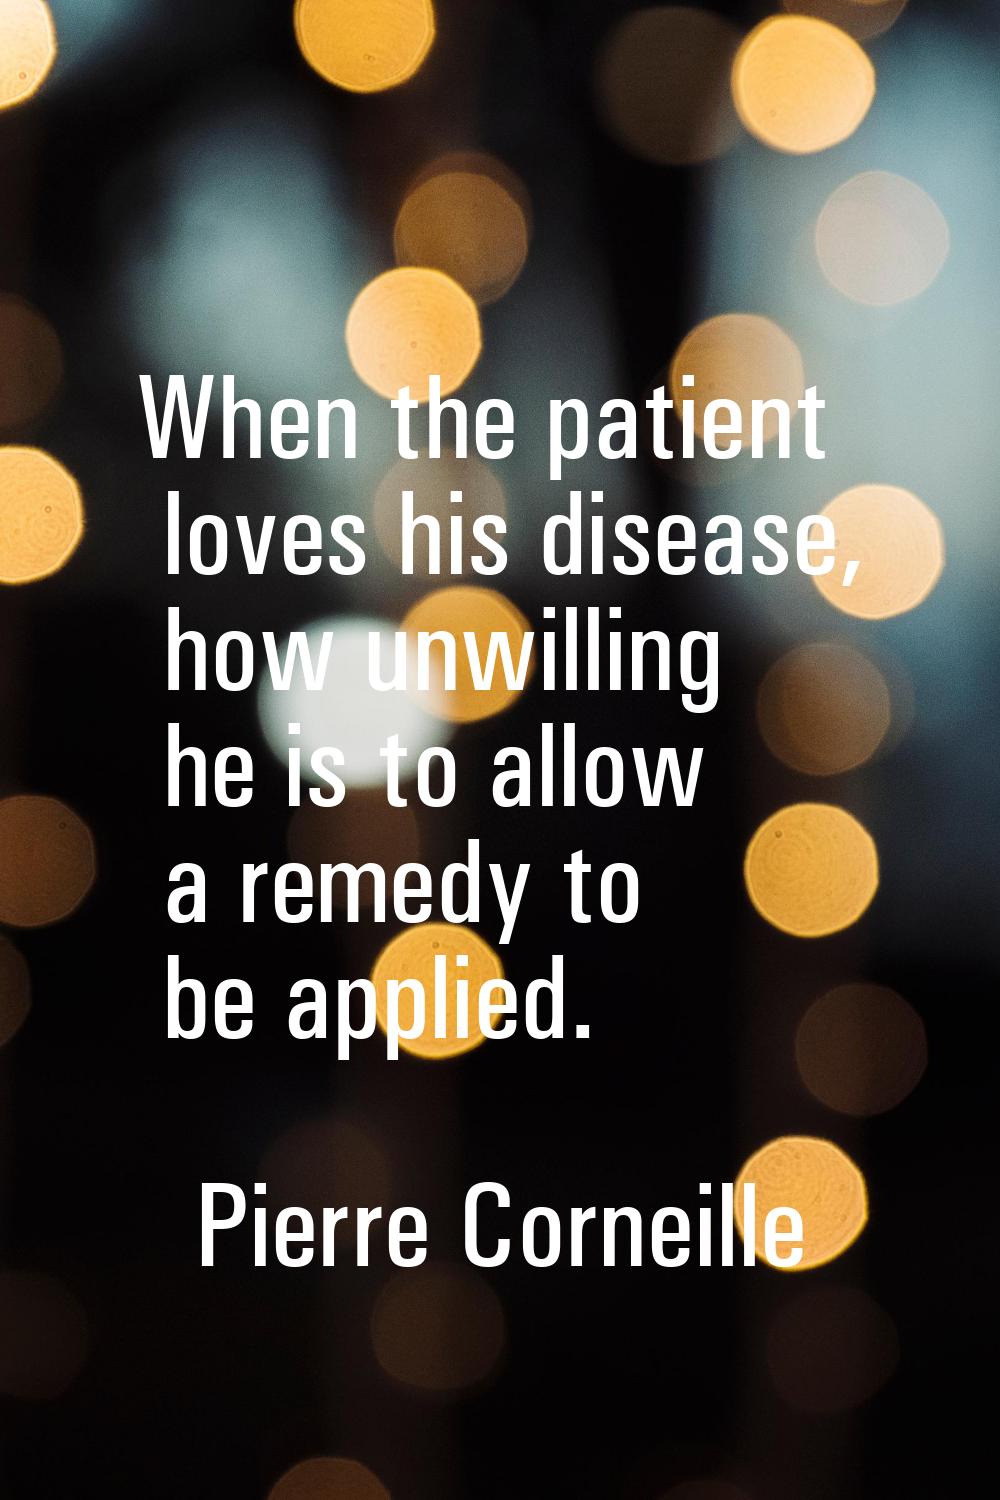 When the patient loves his disease, how unwilling he is to allow a remedy to be applied.